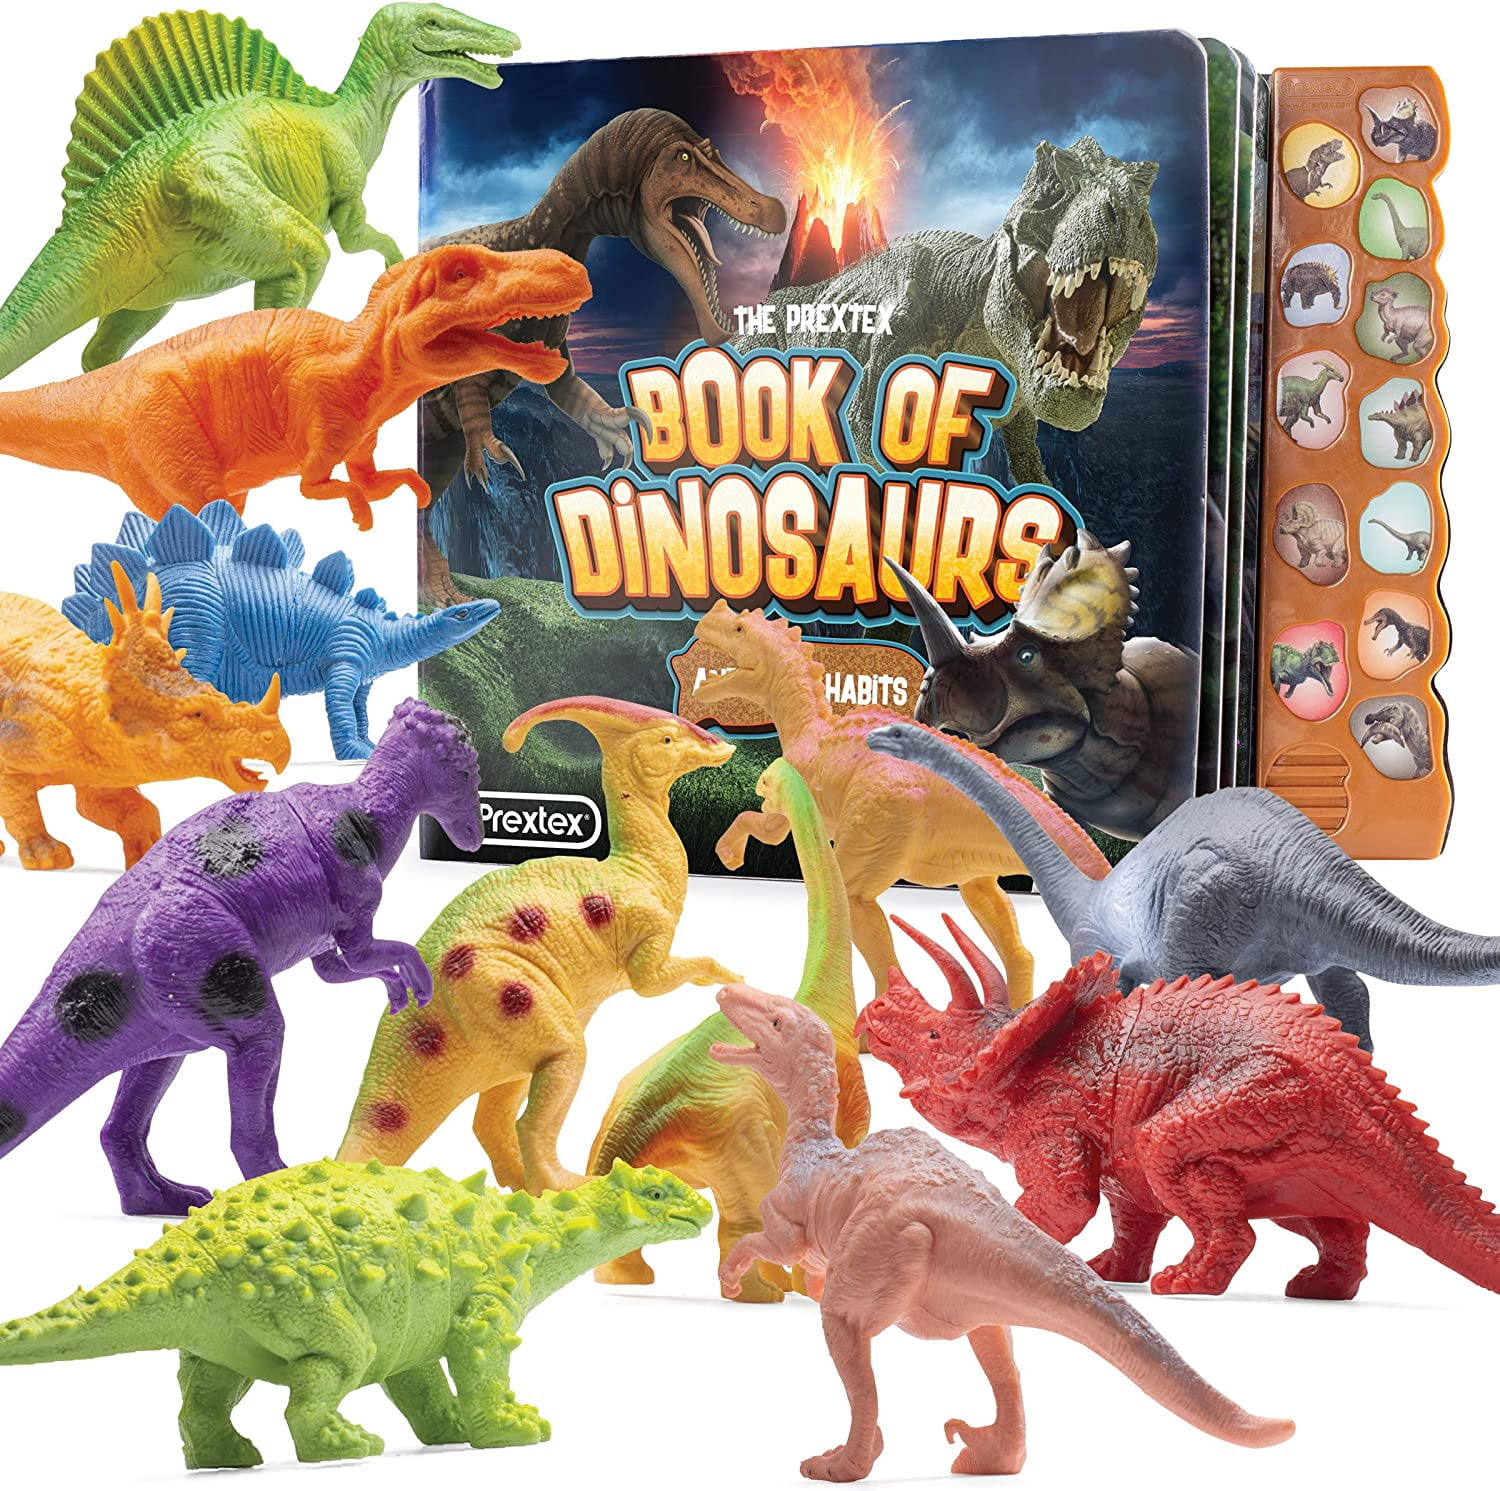 Prextex Realistic Looking Dinosaur with Interactive Dinosaur Sound Book - Pack of Animal Figures Illustrated Dinosaur Sound Book Toys for Boys and Girls 3 Years Old & Up - Walmart.com